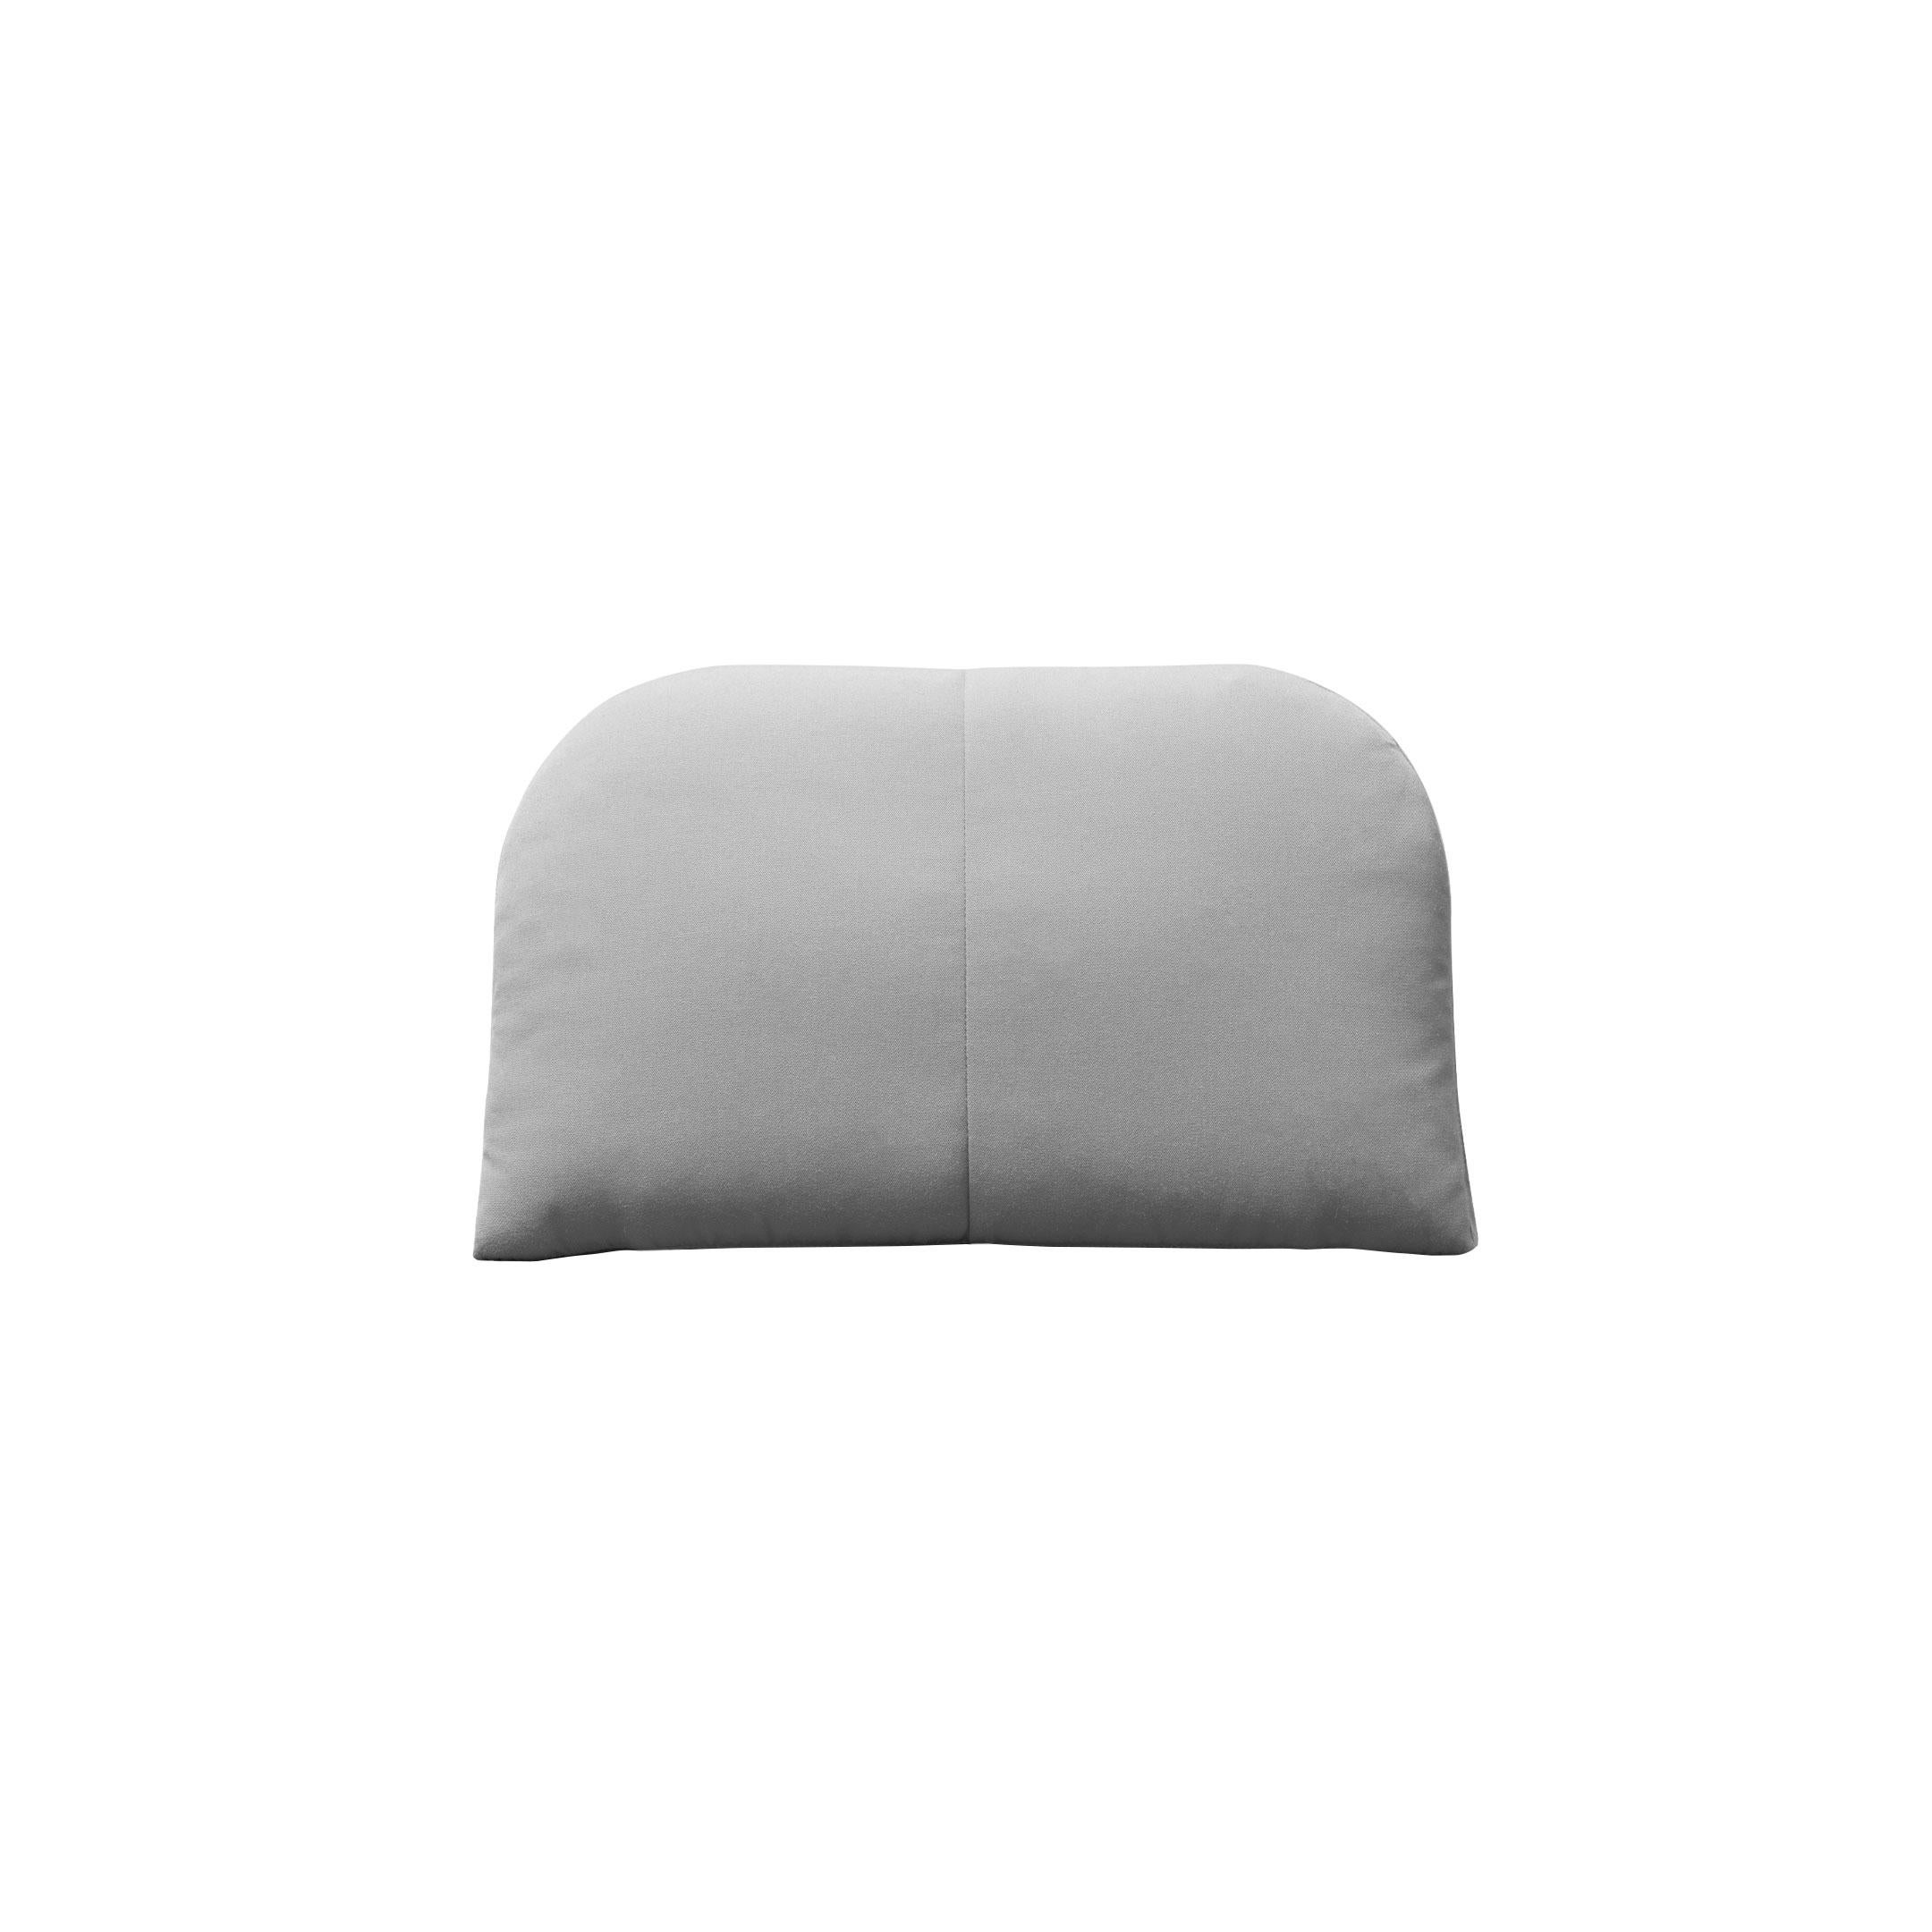 Bend Goods - Arc Throw Pillow in White Sunbrella In New Condition For Sale In Ontario, CA